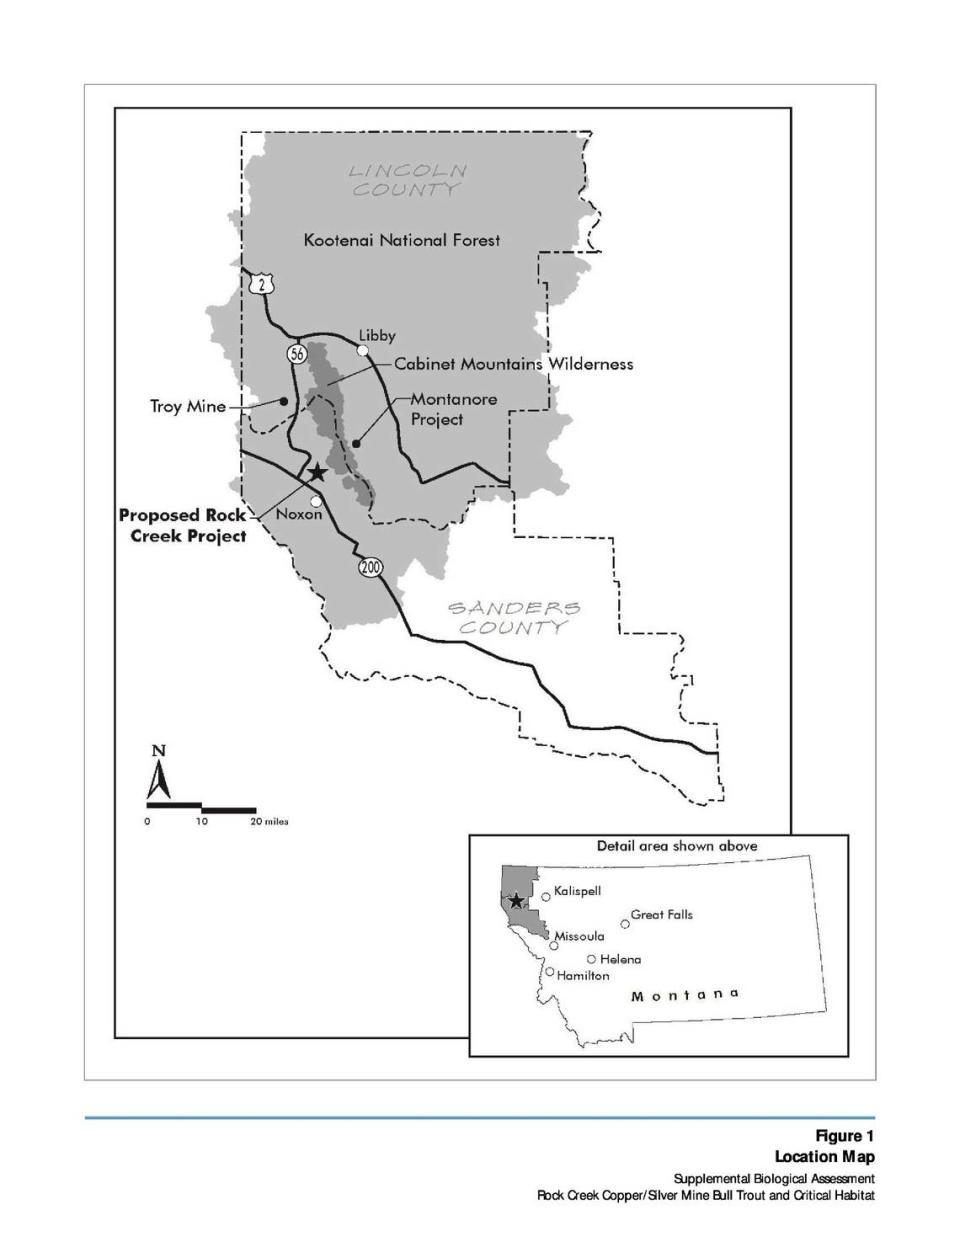 Hecla Mining Co.’s proposed Rock Creek Project for mining copper and silver in northwestern Montana.